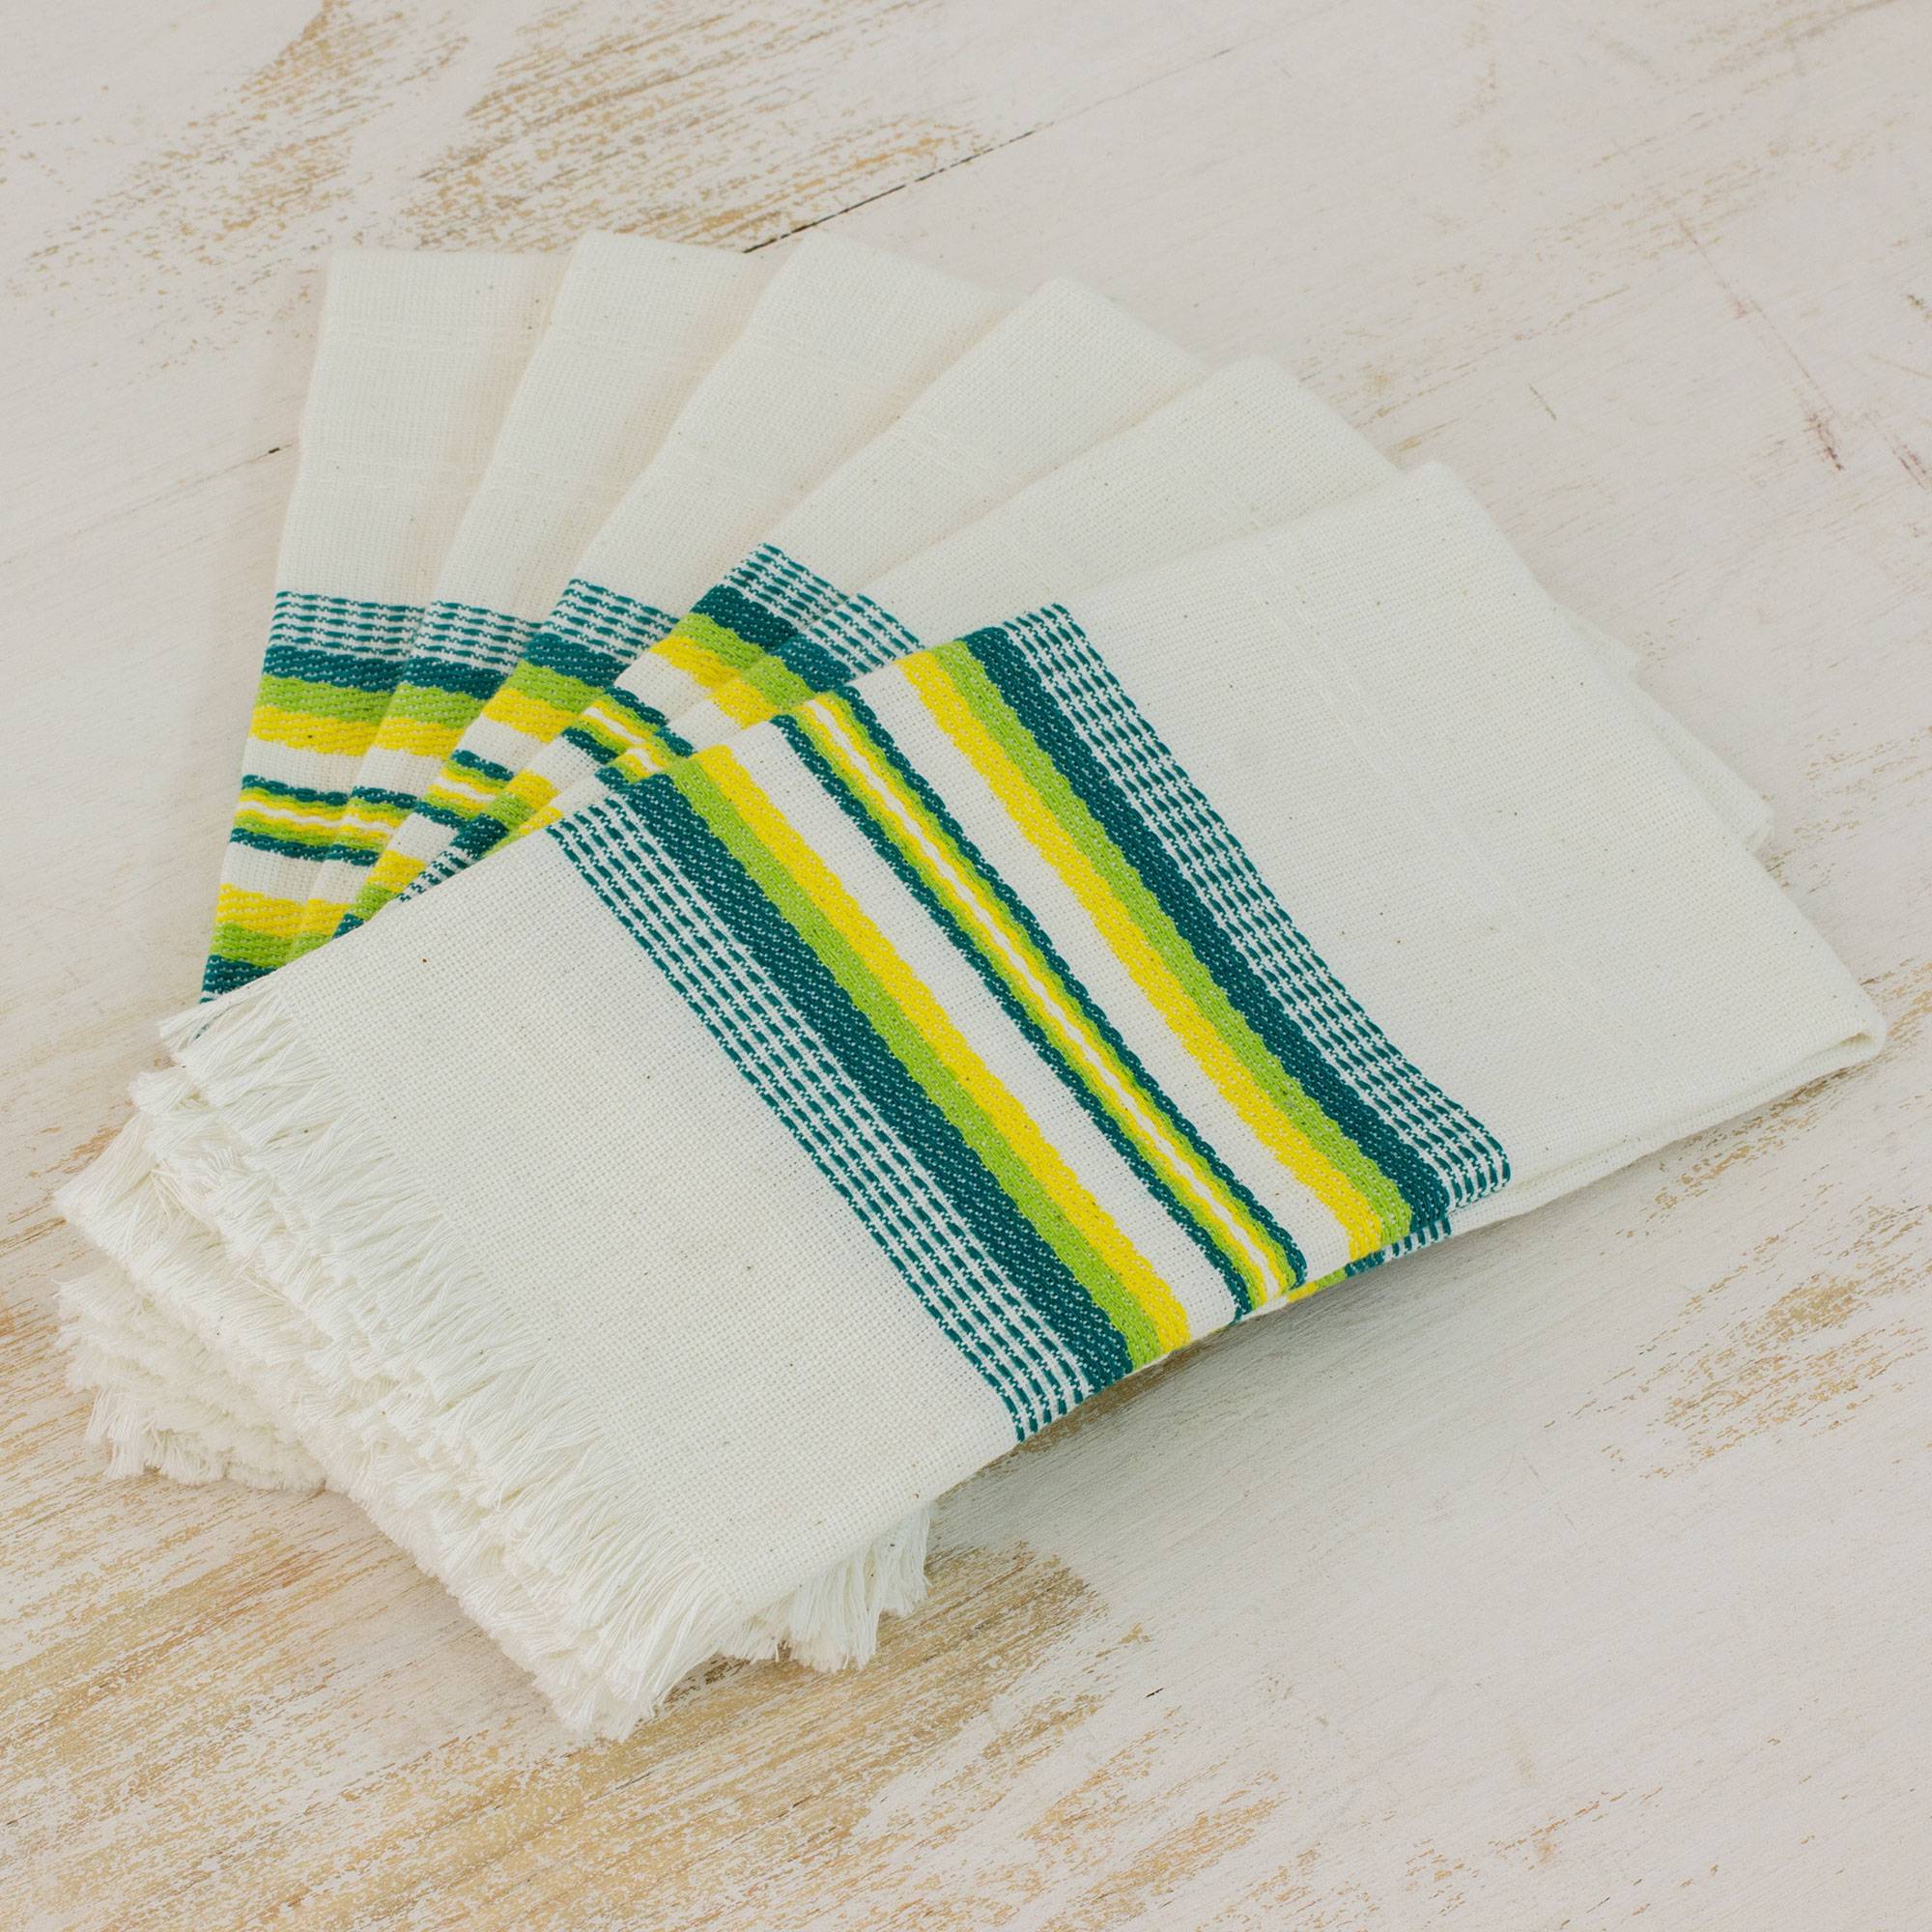 Culinary Inspiration Multicolor 100% Cotton Napkins from Guatemala (Set of 6)